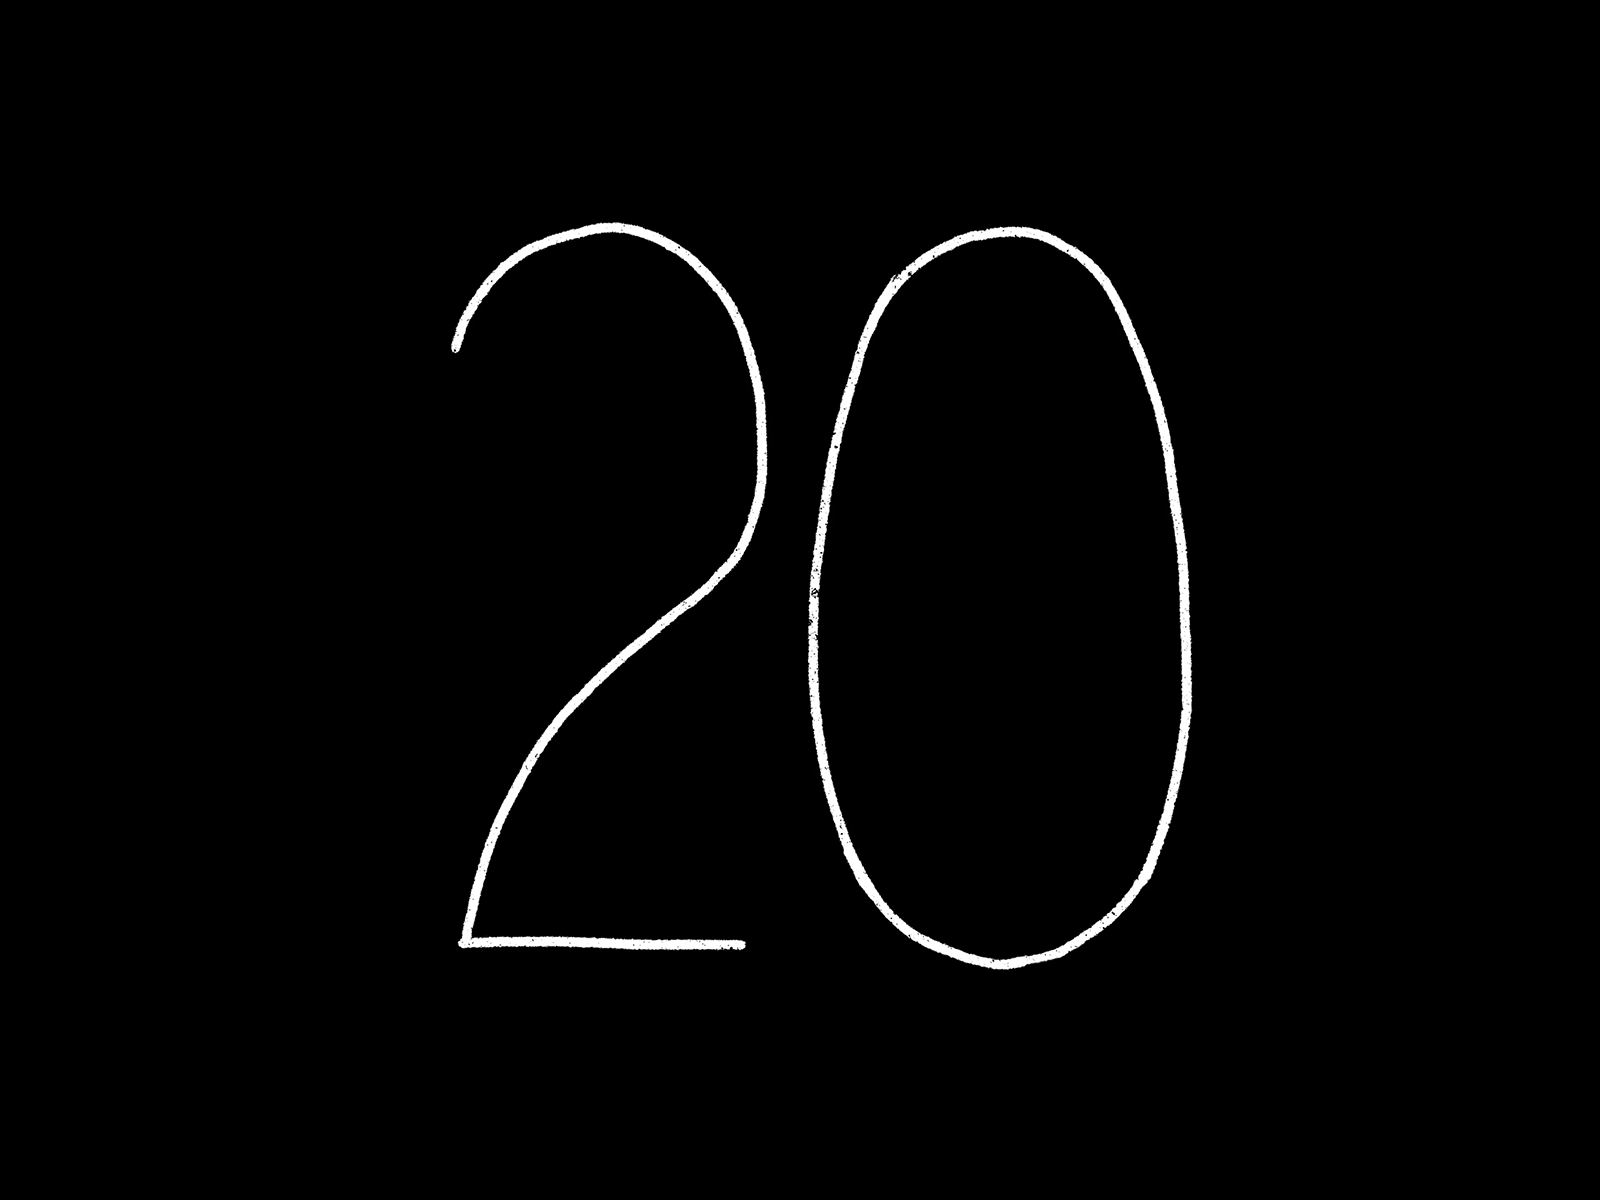 2020 2020 animation drawing frame by frame frame by frame animation goo lettering procreate